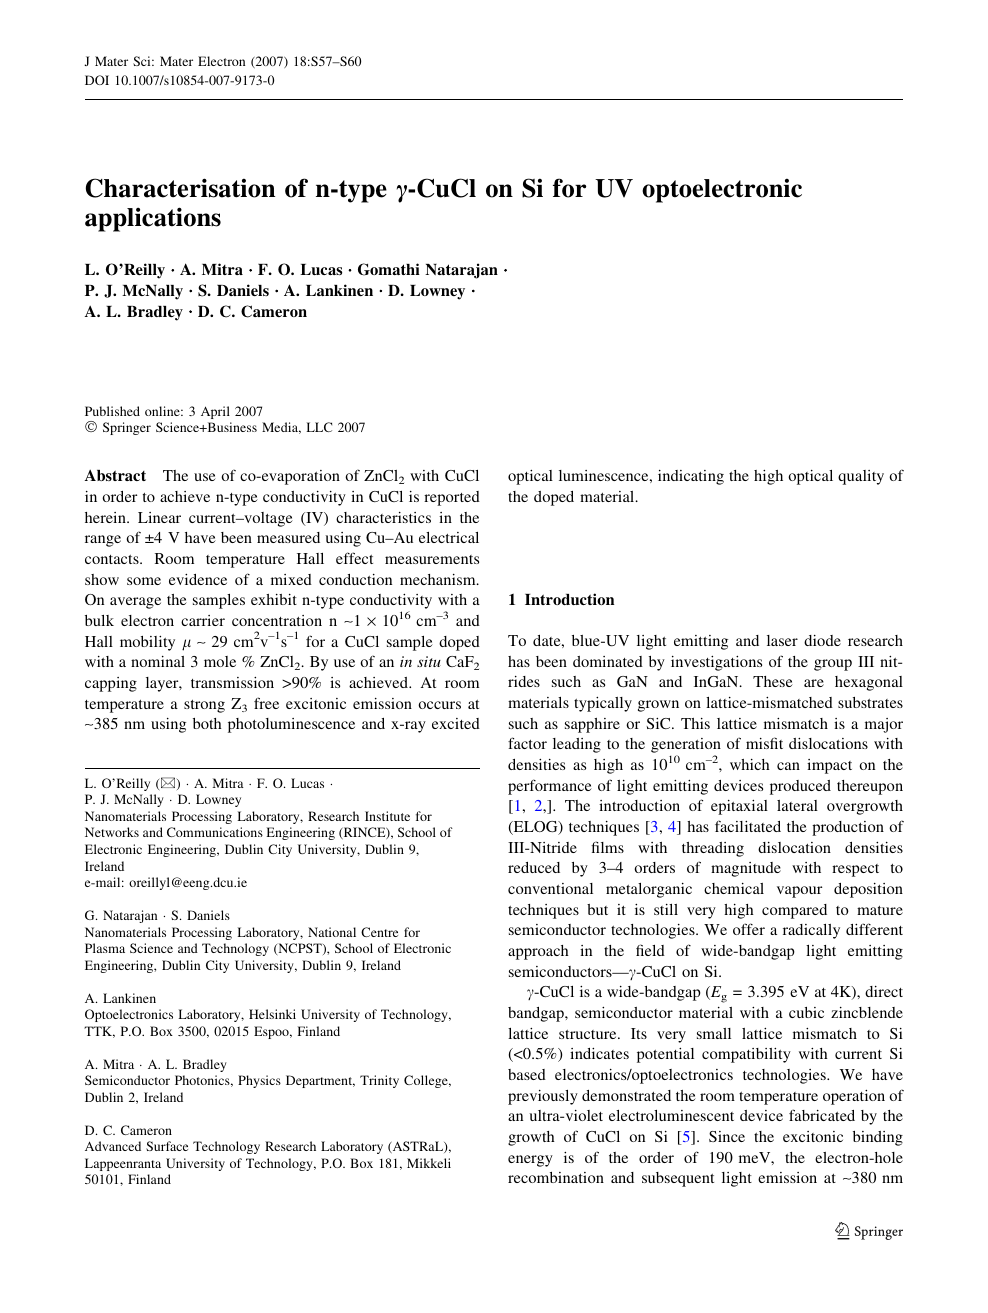 Characterisation Of N Type G Cucl On Si For Uv Optoelectronic Applications Topic Of Research Paper In Nano Technology Download Scholarly Article Pdf And Read For Free On Cyberleninka Open Science Hub